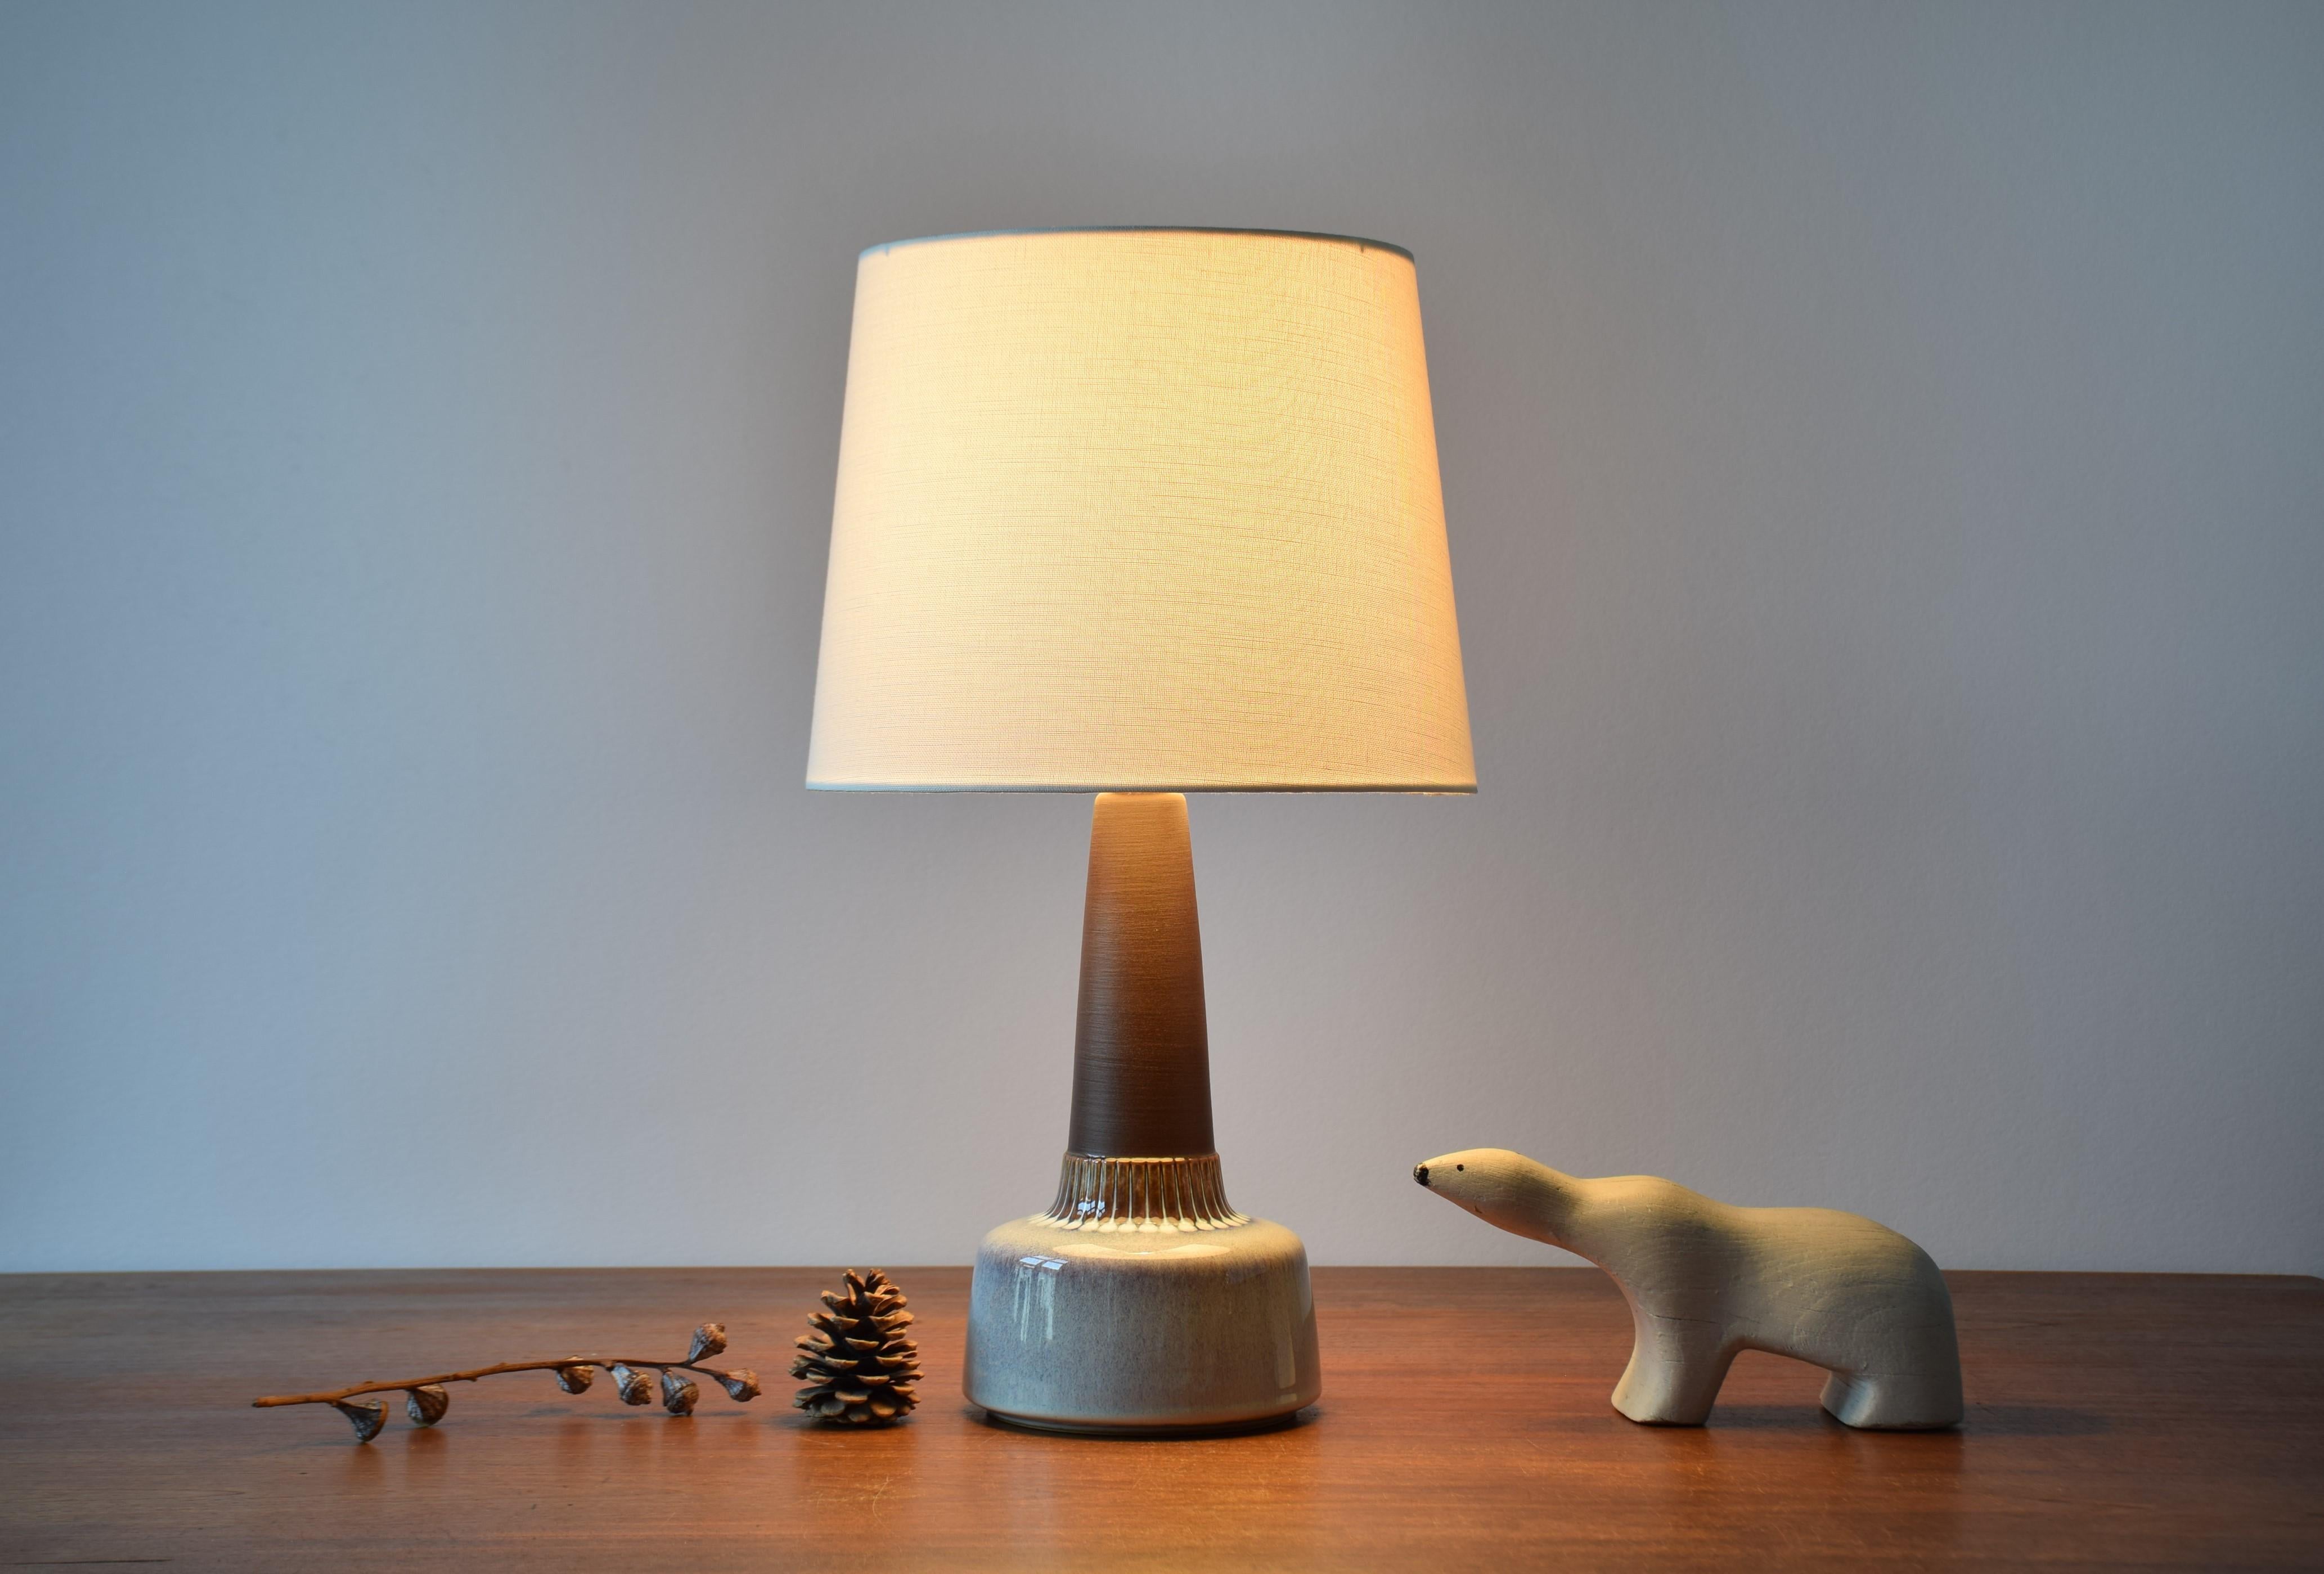 Midcentury Danish table lamp by Danish ceramist Einar Johansen for Søholm. Made circa 1960s.

The lampbase has a matte brown neck contrasted by a shiny glaze in mother-of-pearl colors and circular dots around the lower part.

The lamp has an